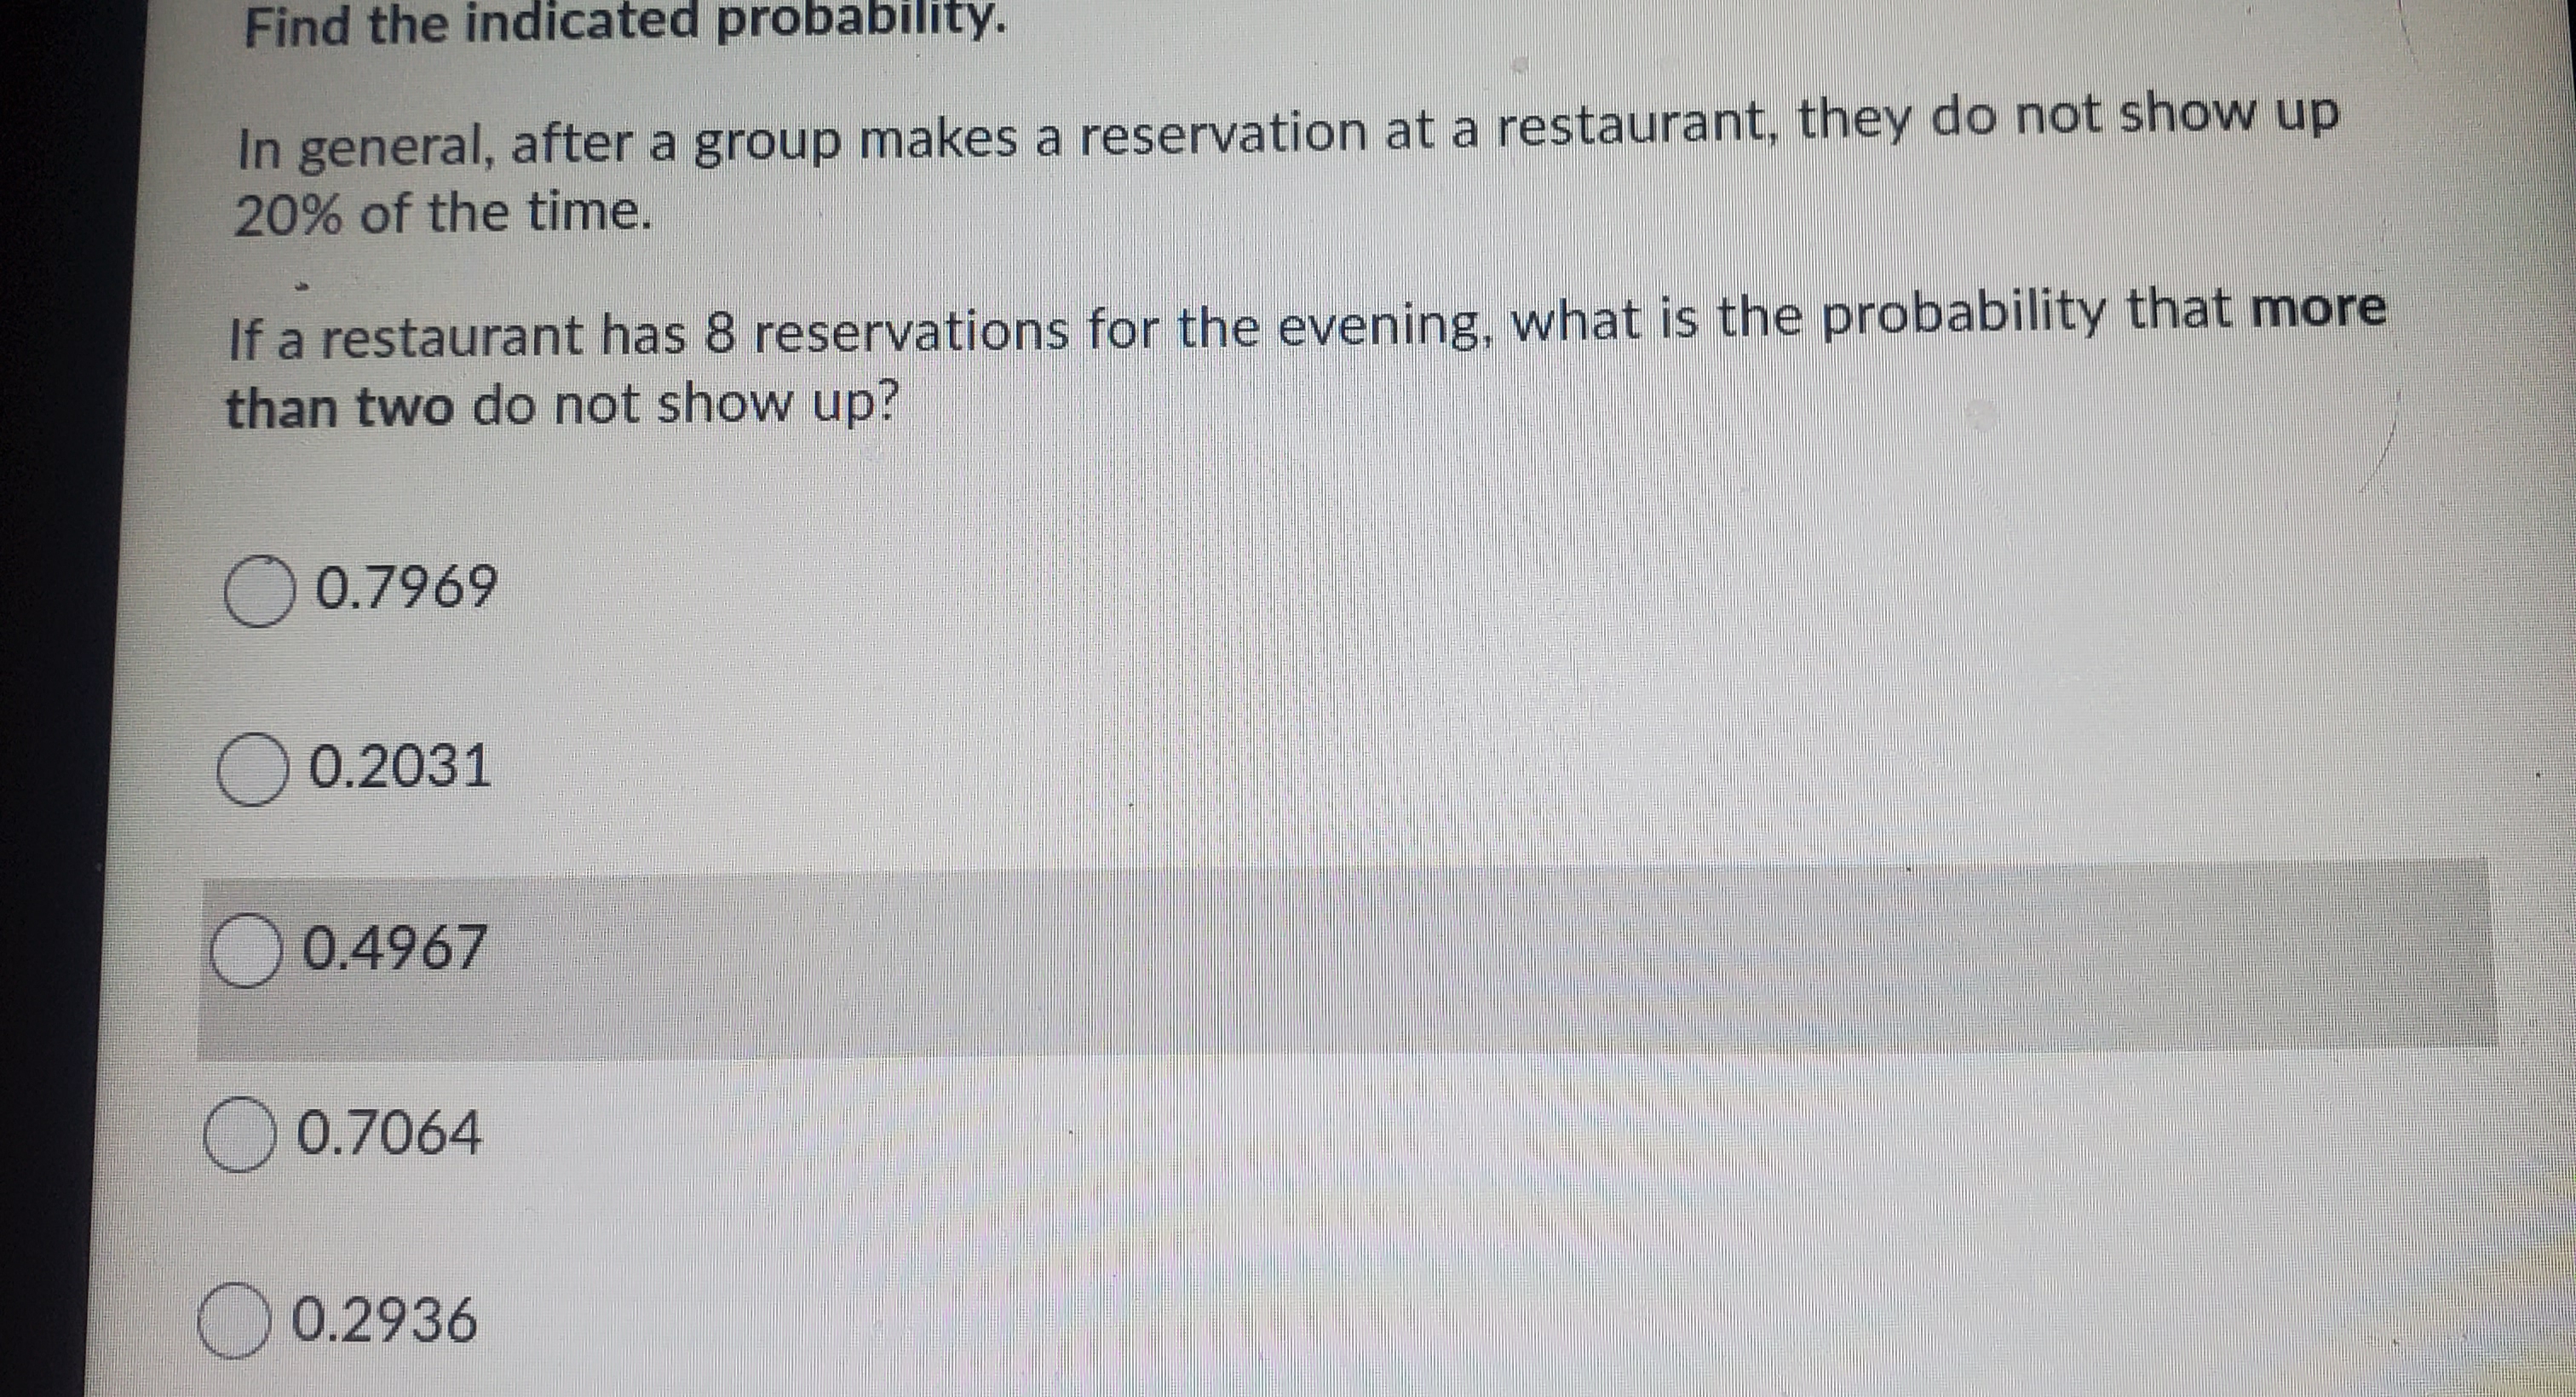 Find the indicated probability.
In general, after a group makes a reservation at a restaurant, they do not show up
20% of the time.
If a restaurant has 8 reservations for the evening, what is the probability that more
than two do not show up?
O 0.7969
O 0.2031
0.4967
O 0.7064
0.2936
